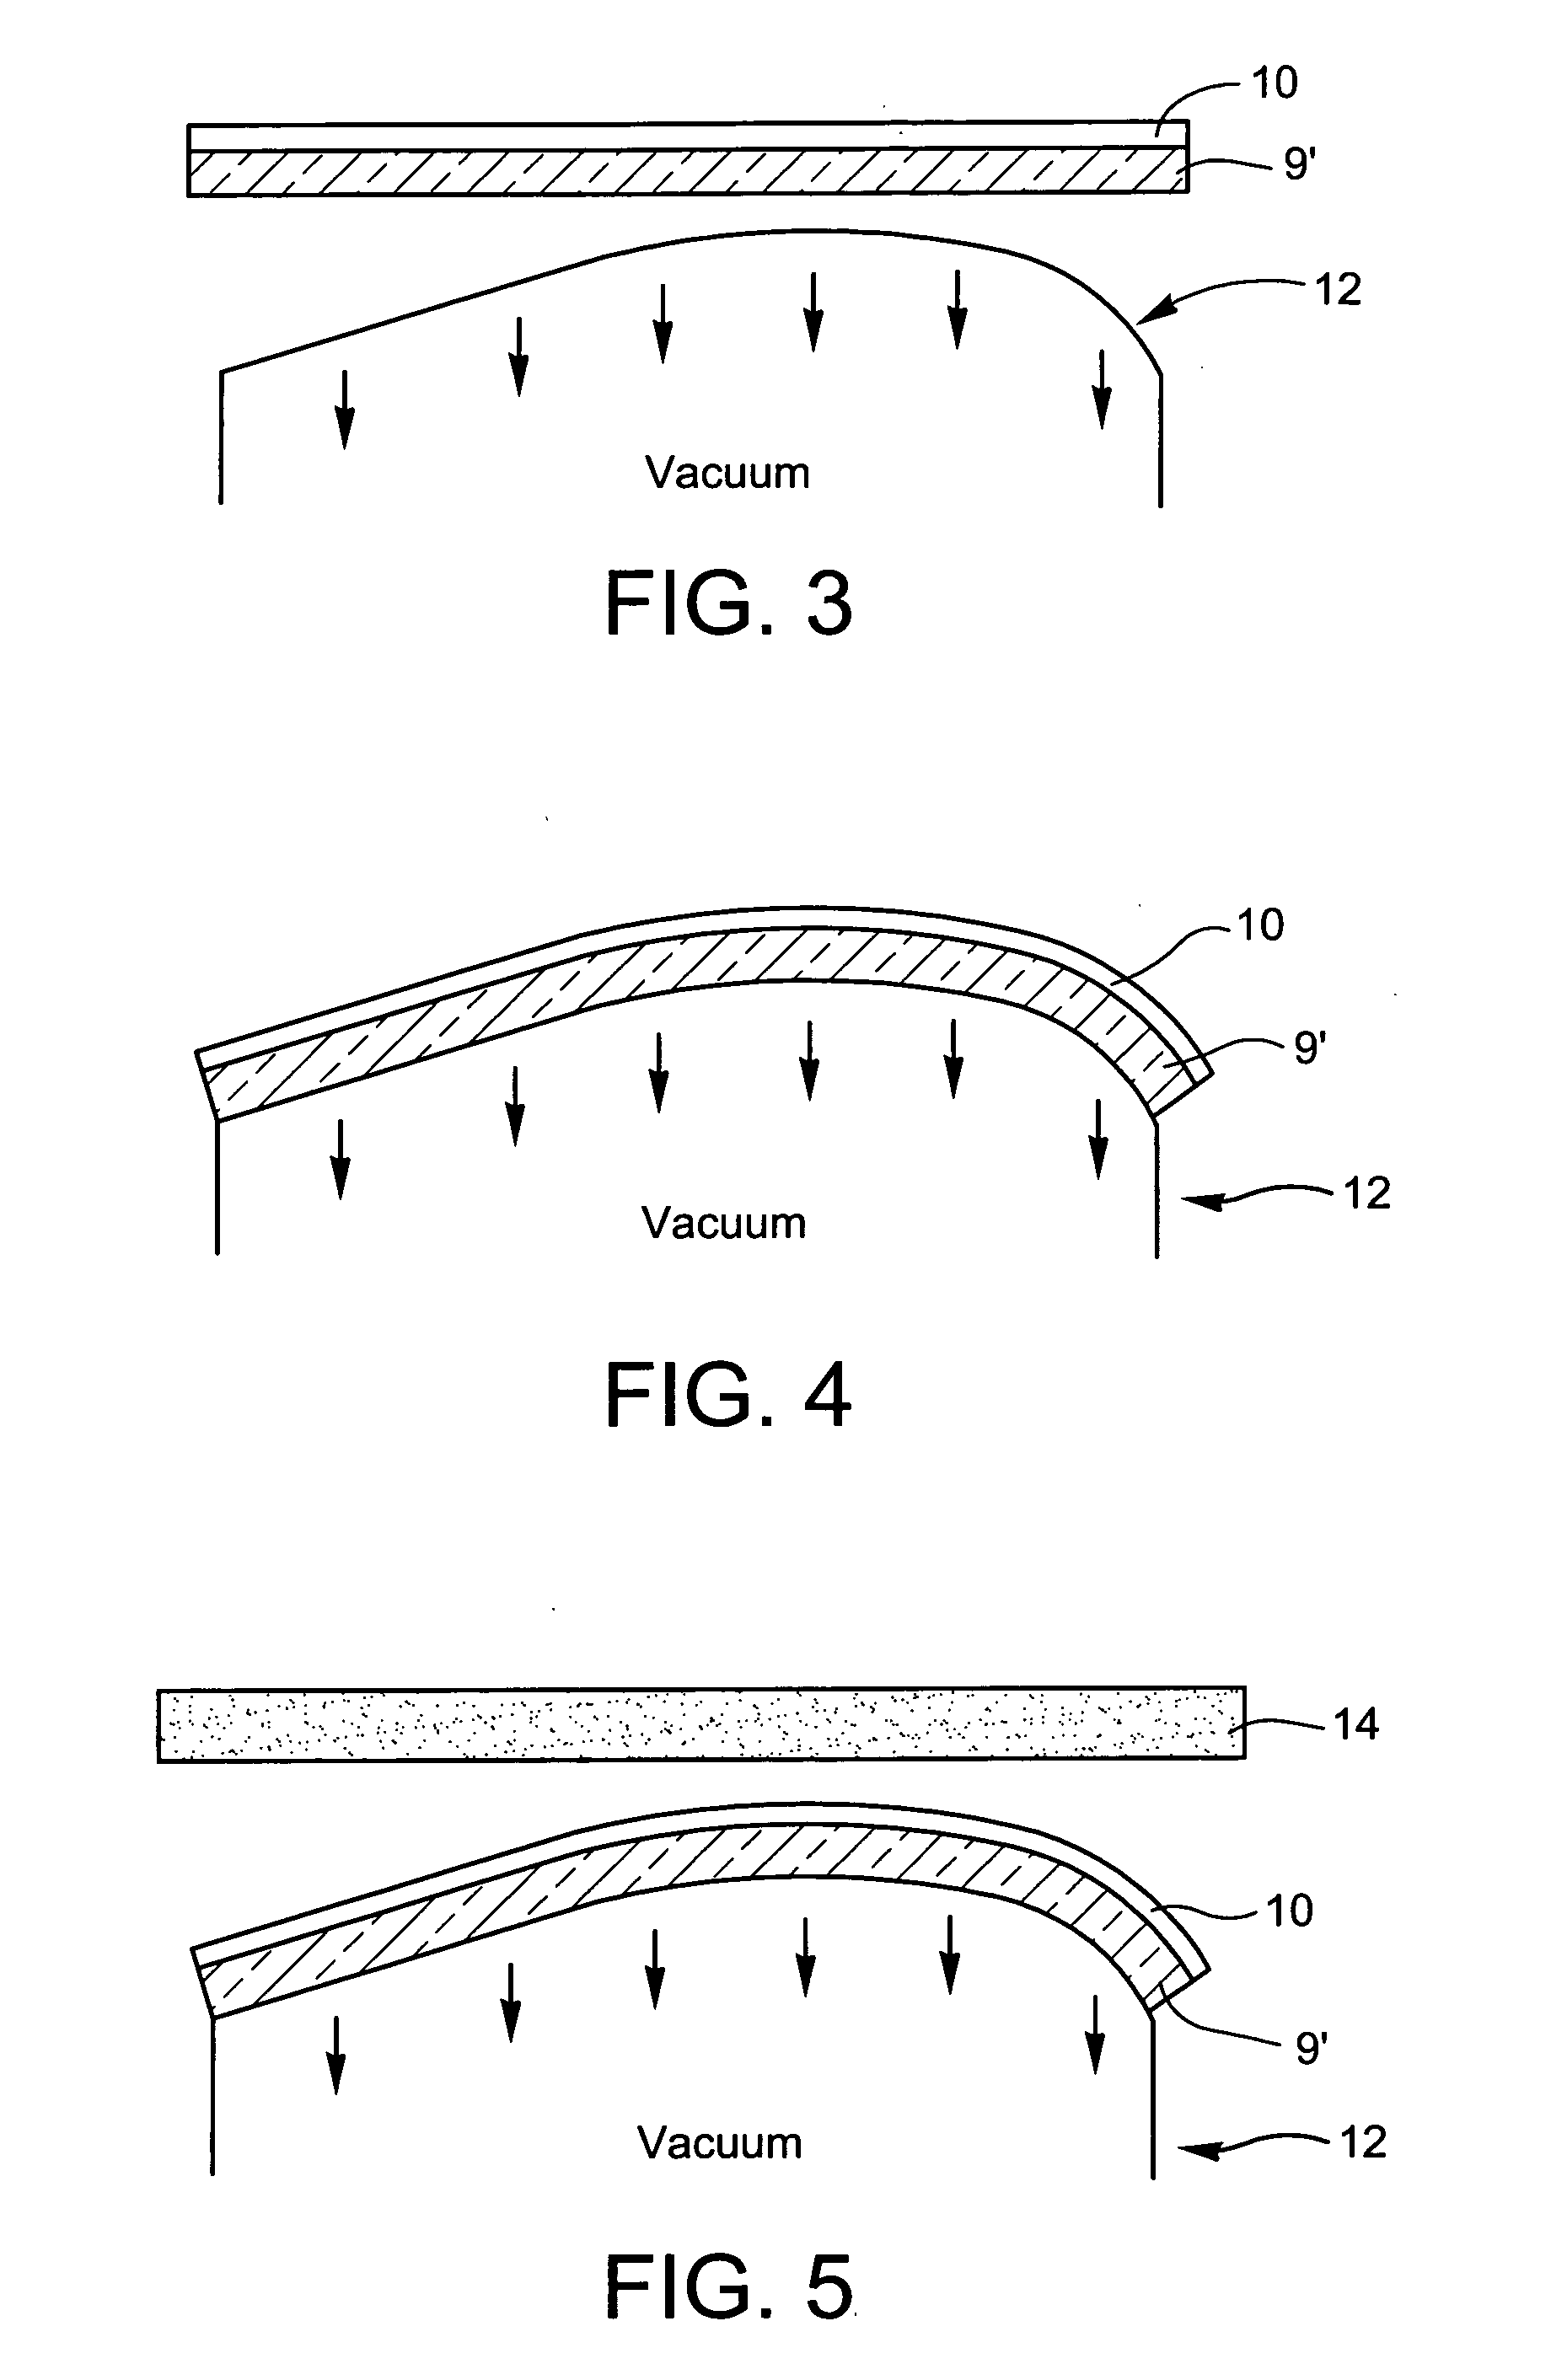 Method of making reflector for solar collector or the like, and corresponding product, including reflective coating designed for improved adherence to laminating layer